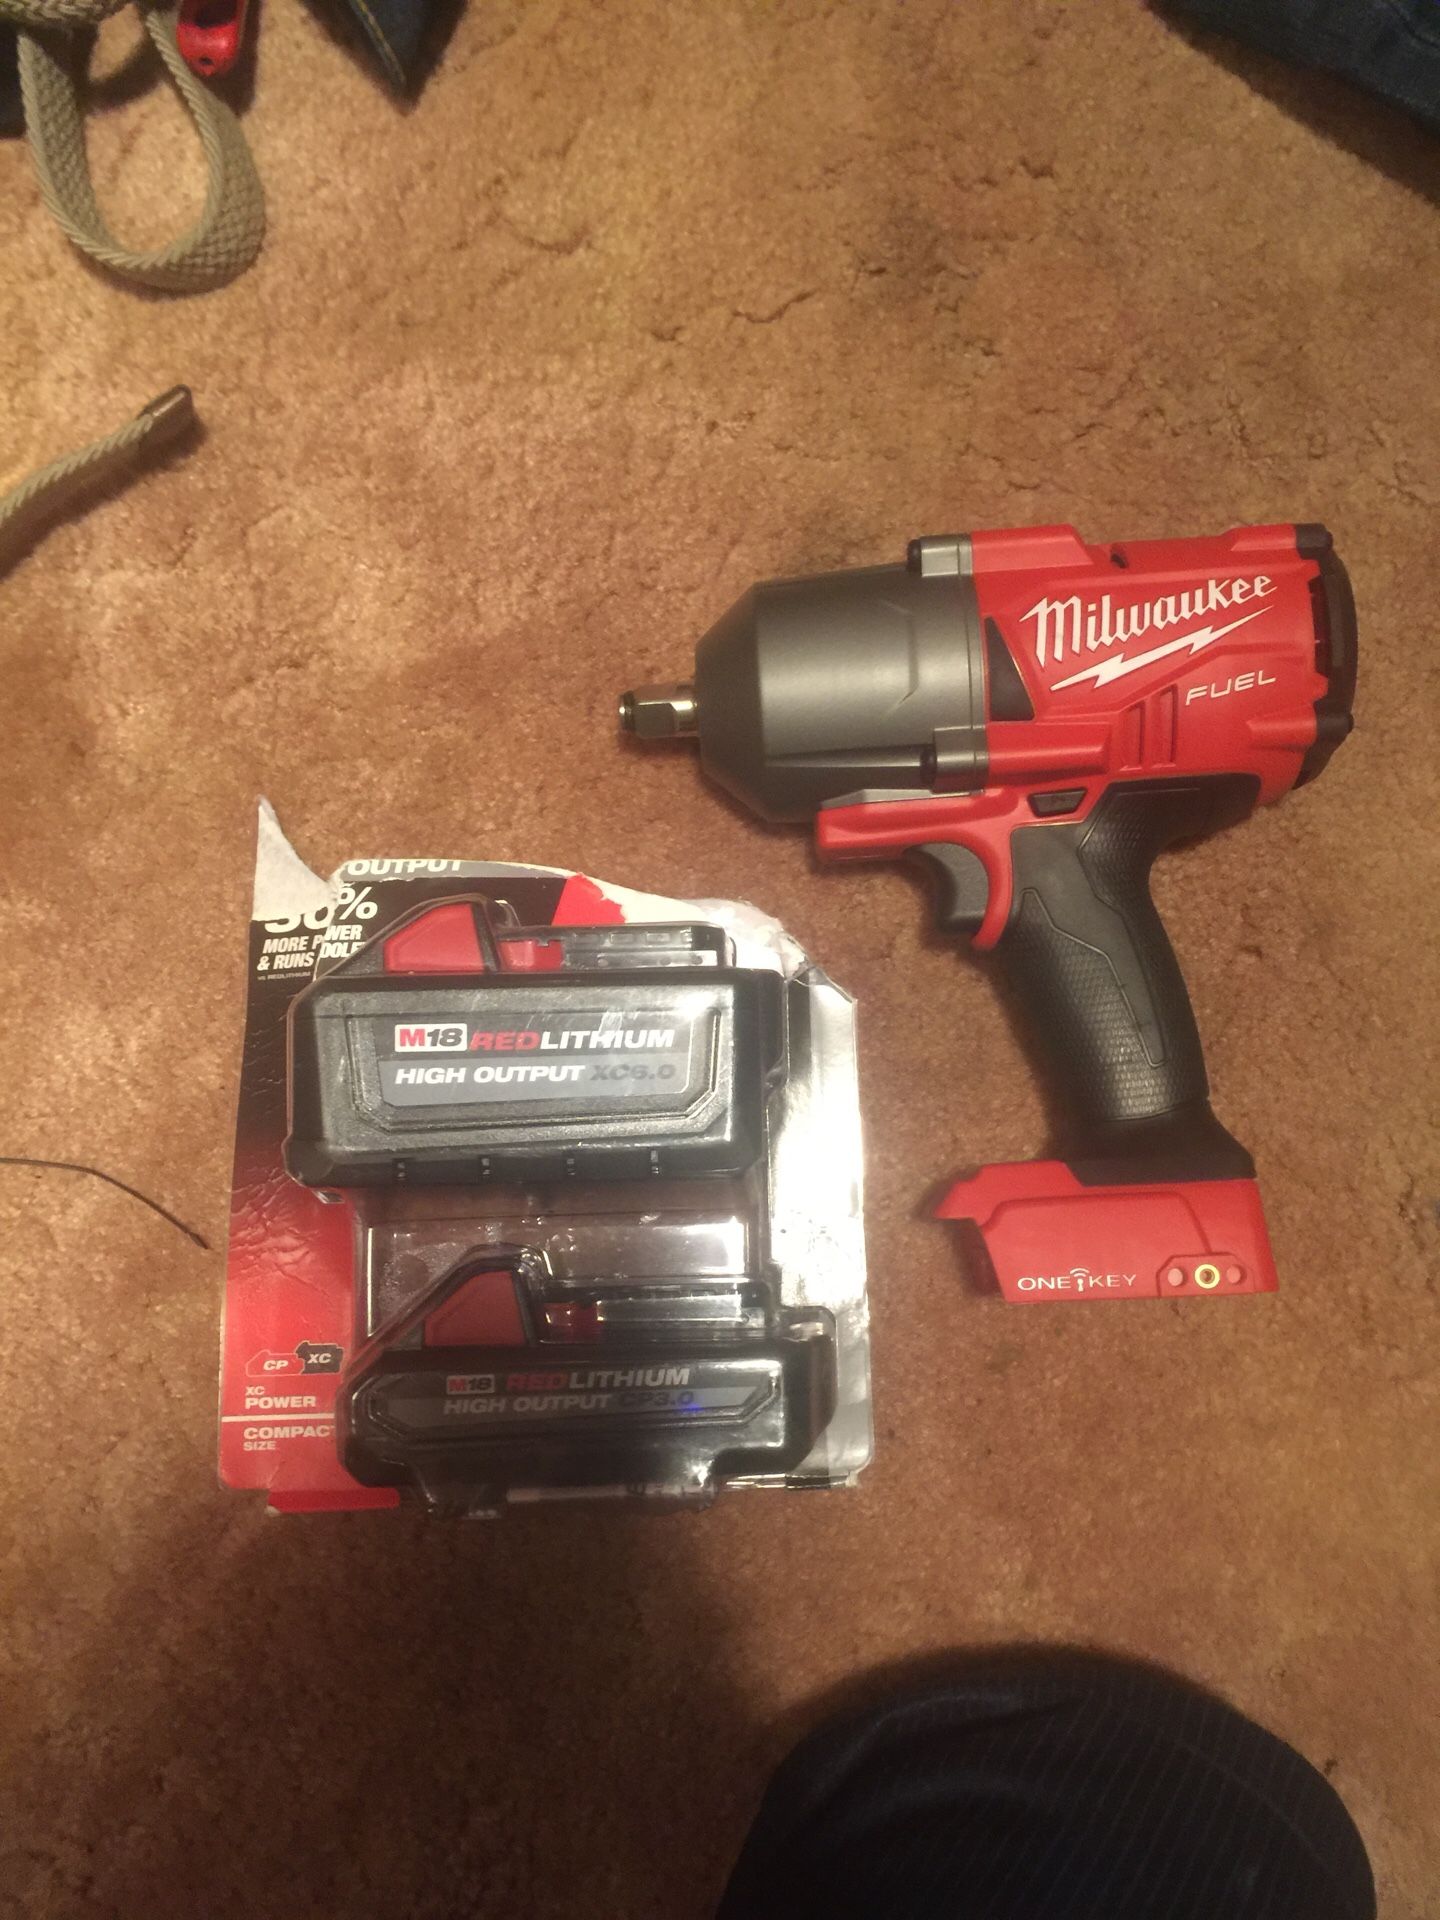 Milwaukee fuel one key model 2863-20 impact wrench and m18 6.0 and 3.0 batteries